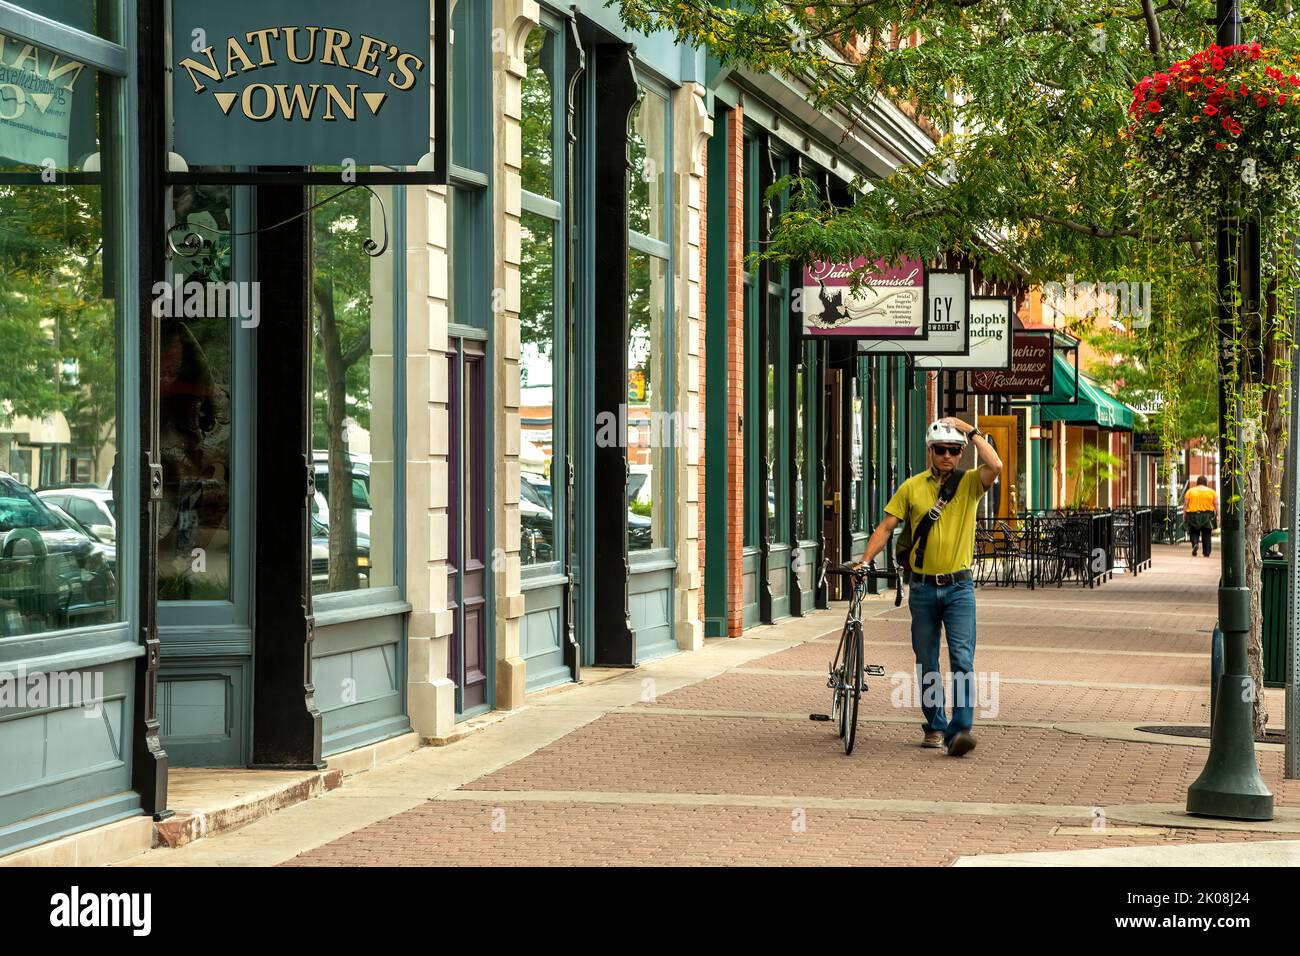 Man walking his bike by shops and stores, Old Town, Fort Collins, Colorado USA Stock Photo